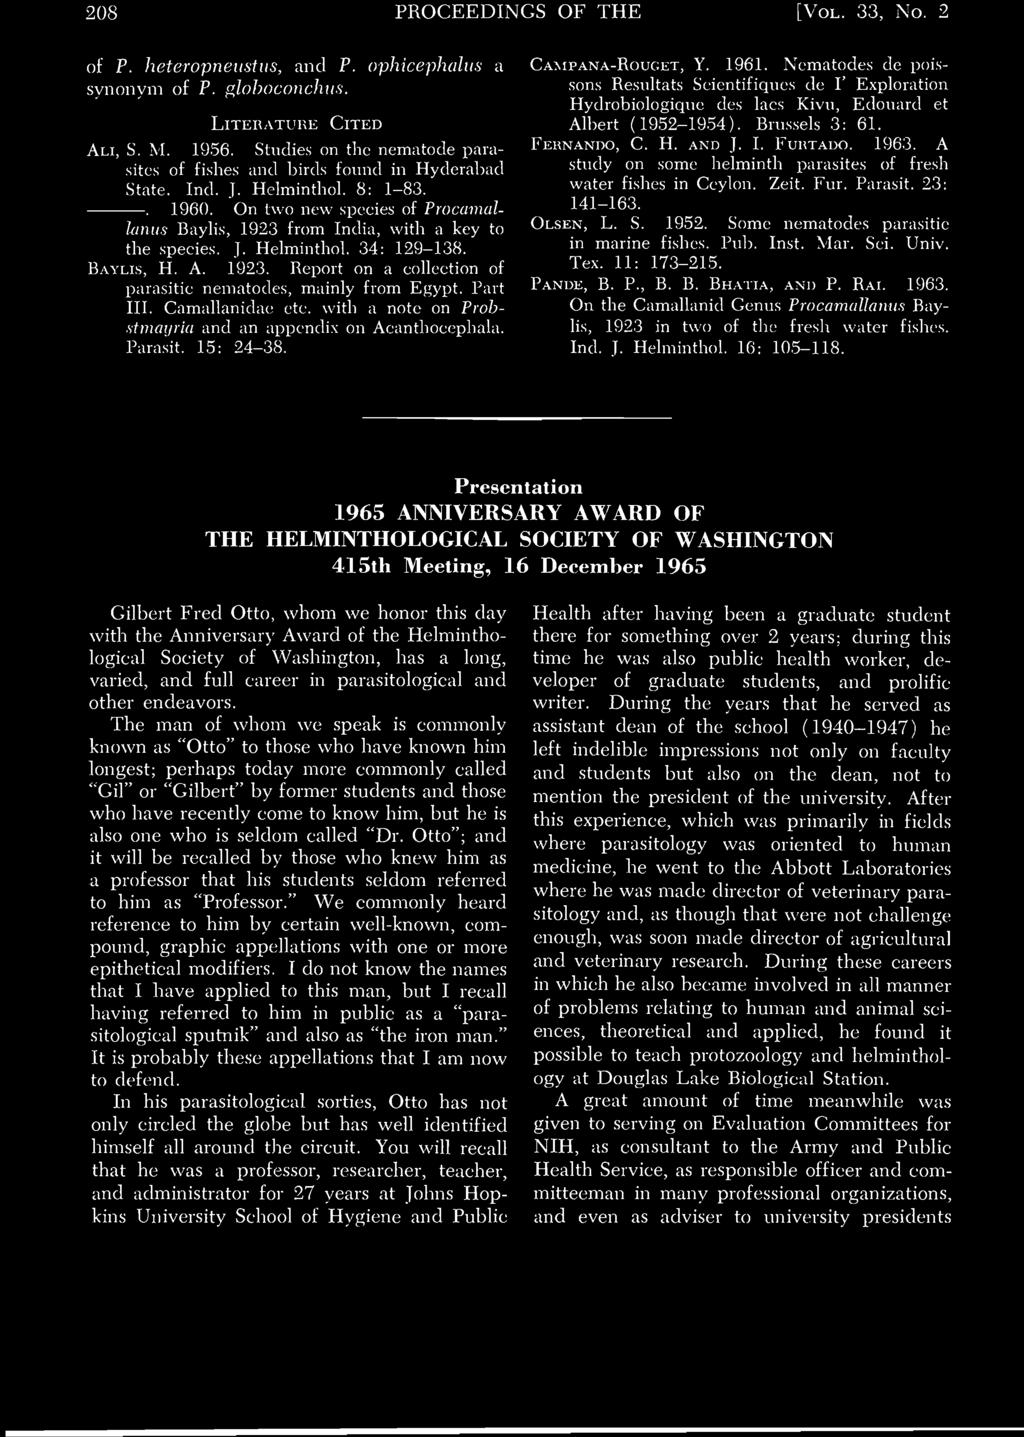 208 PROCEEDINGS OF THE [VOL. 33, No. 2 of P. heteropneustus, and P. ophicephaluv a synonym of P. globoconchiis. LITERATURE CITED ALI, S. M. 1956.